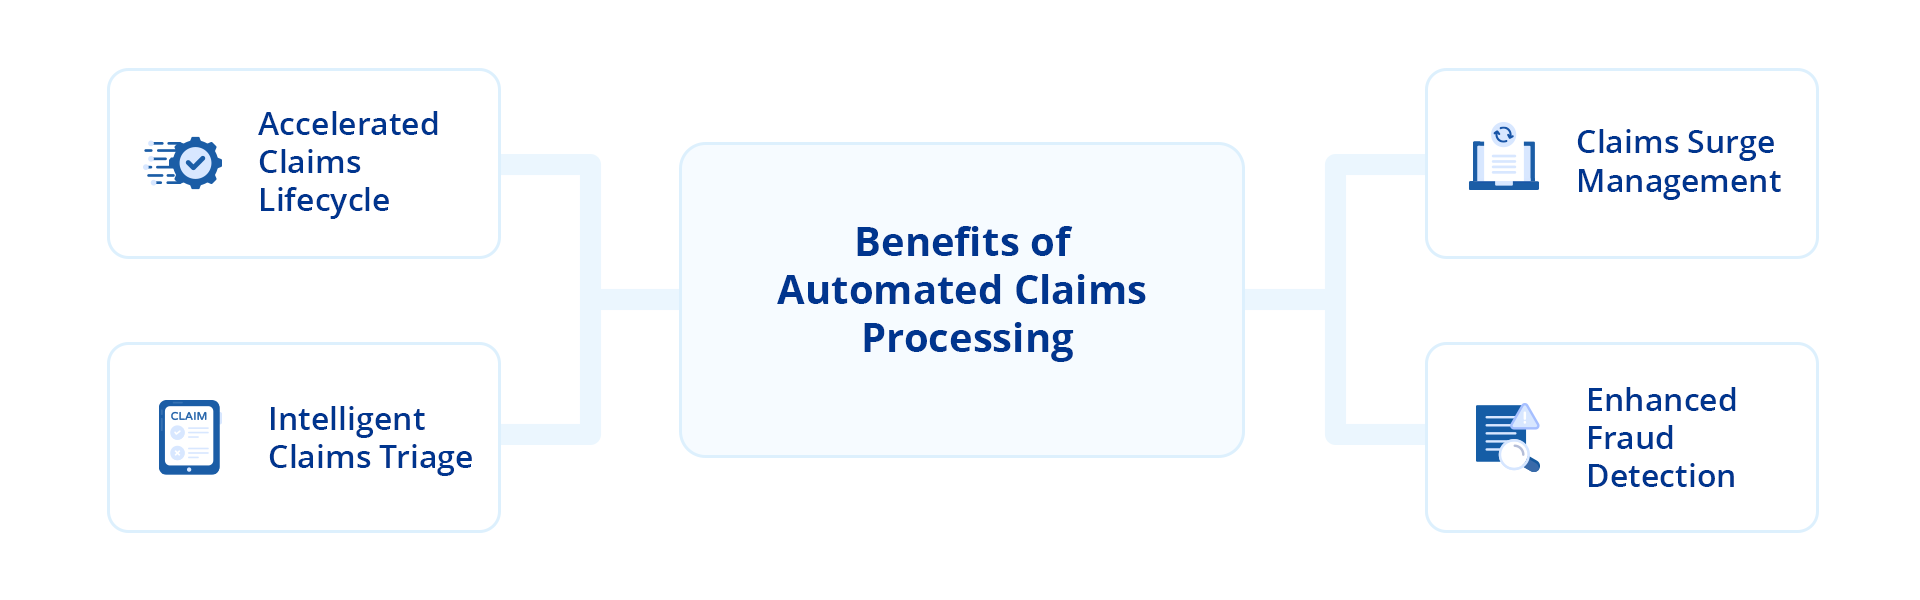 Benefits of Automated Claims Processing